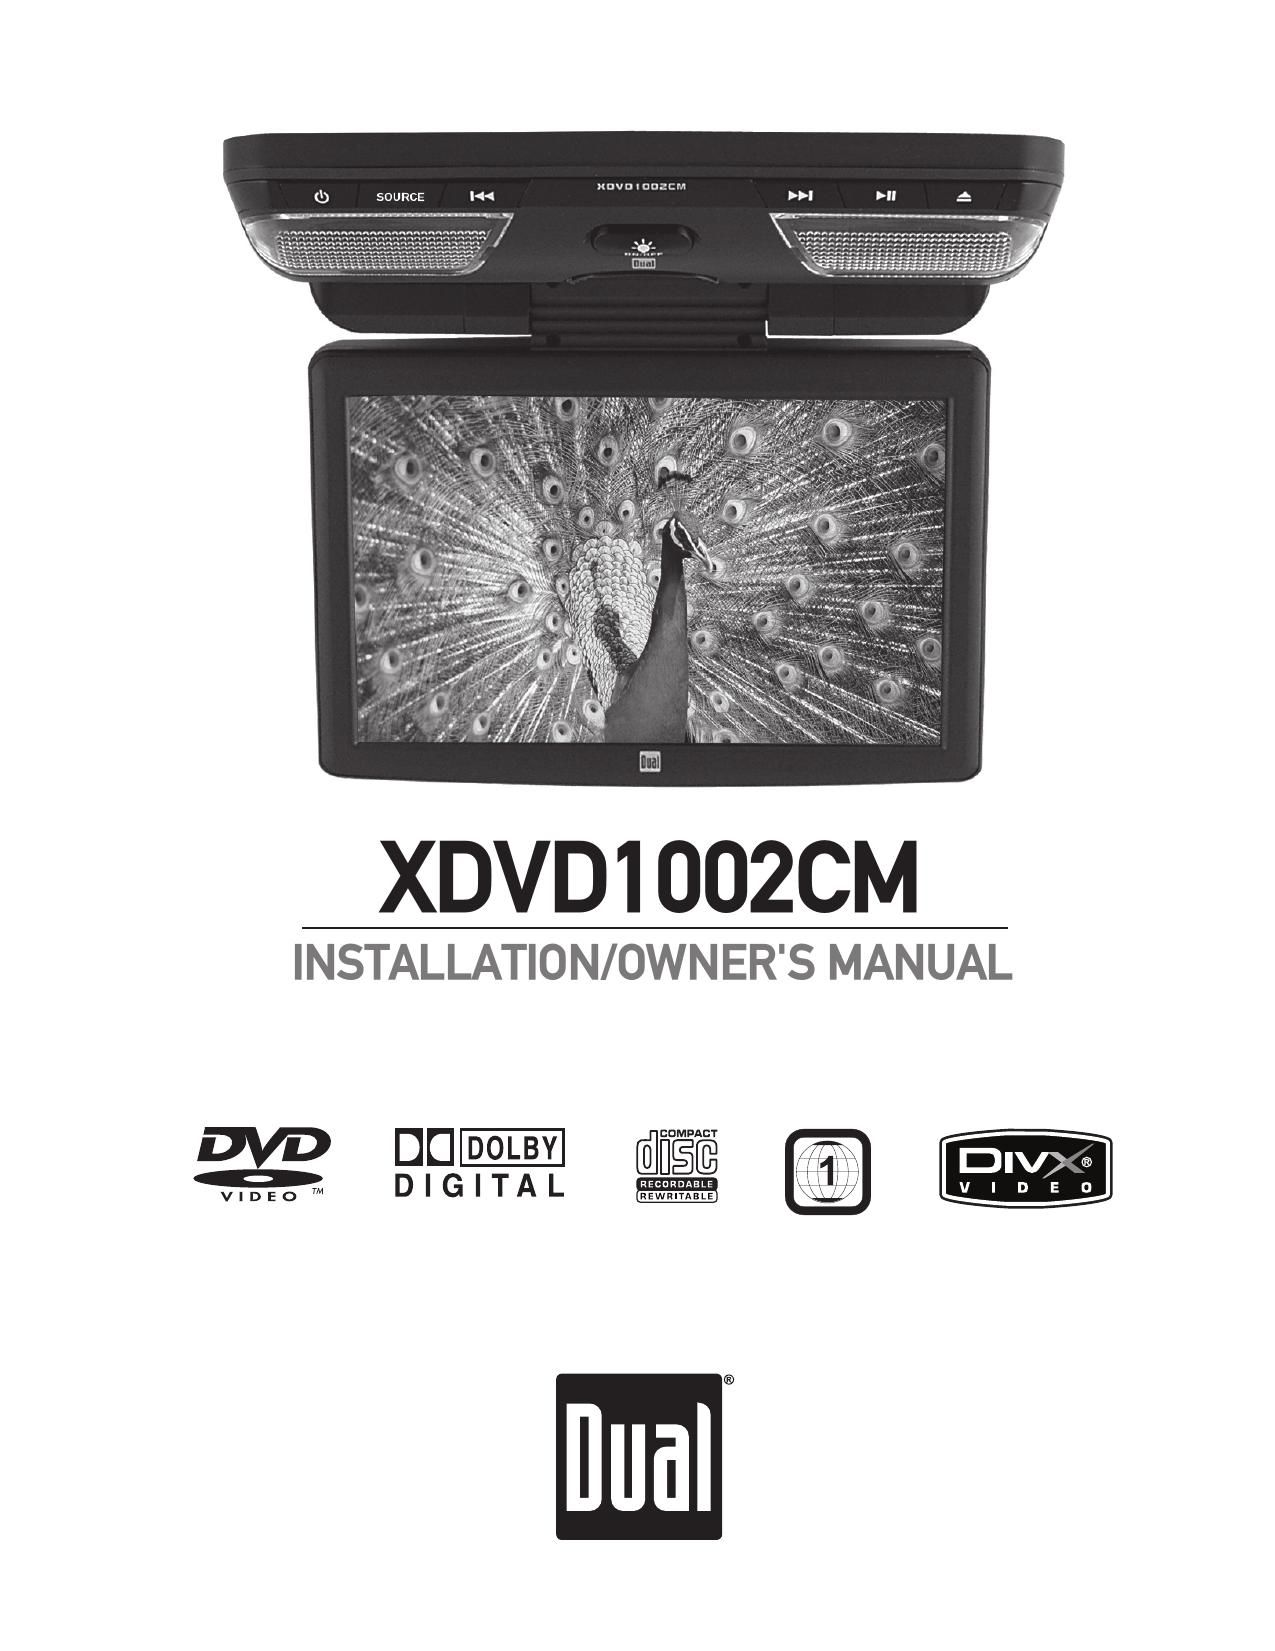 Dual XDVD 1002CM Owners Manual